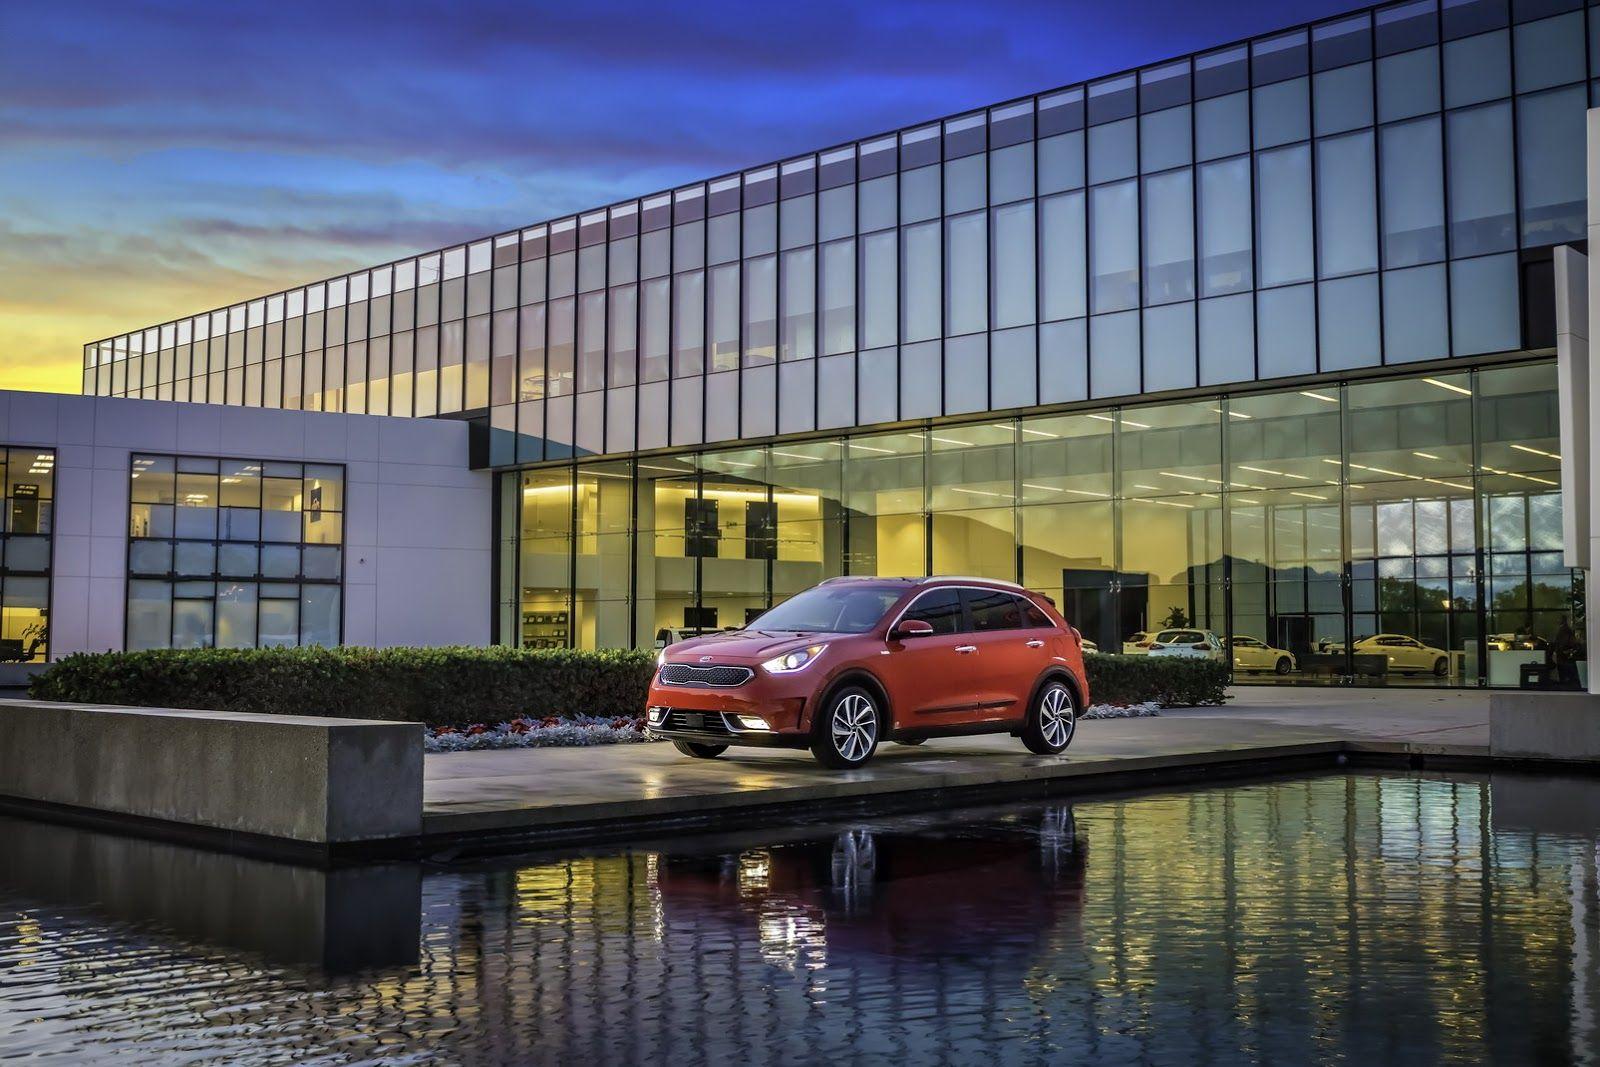 Niro EV Possible As Kia Is Looking Into Reducing Carbon Emissions